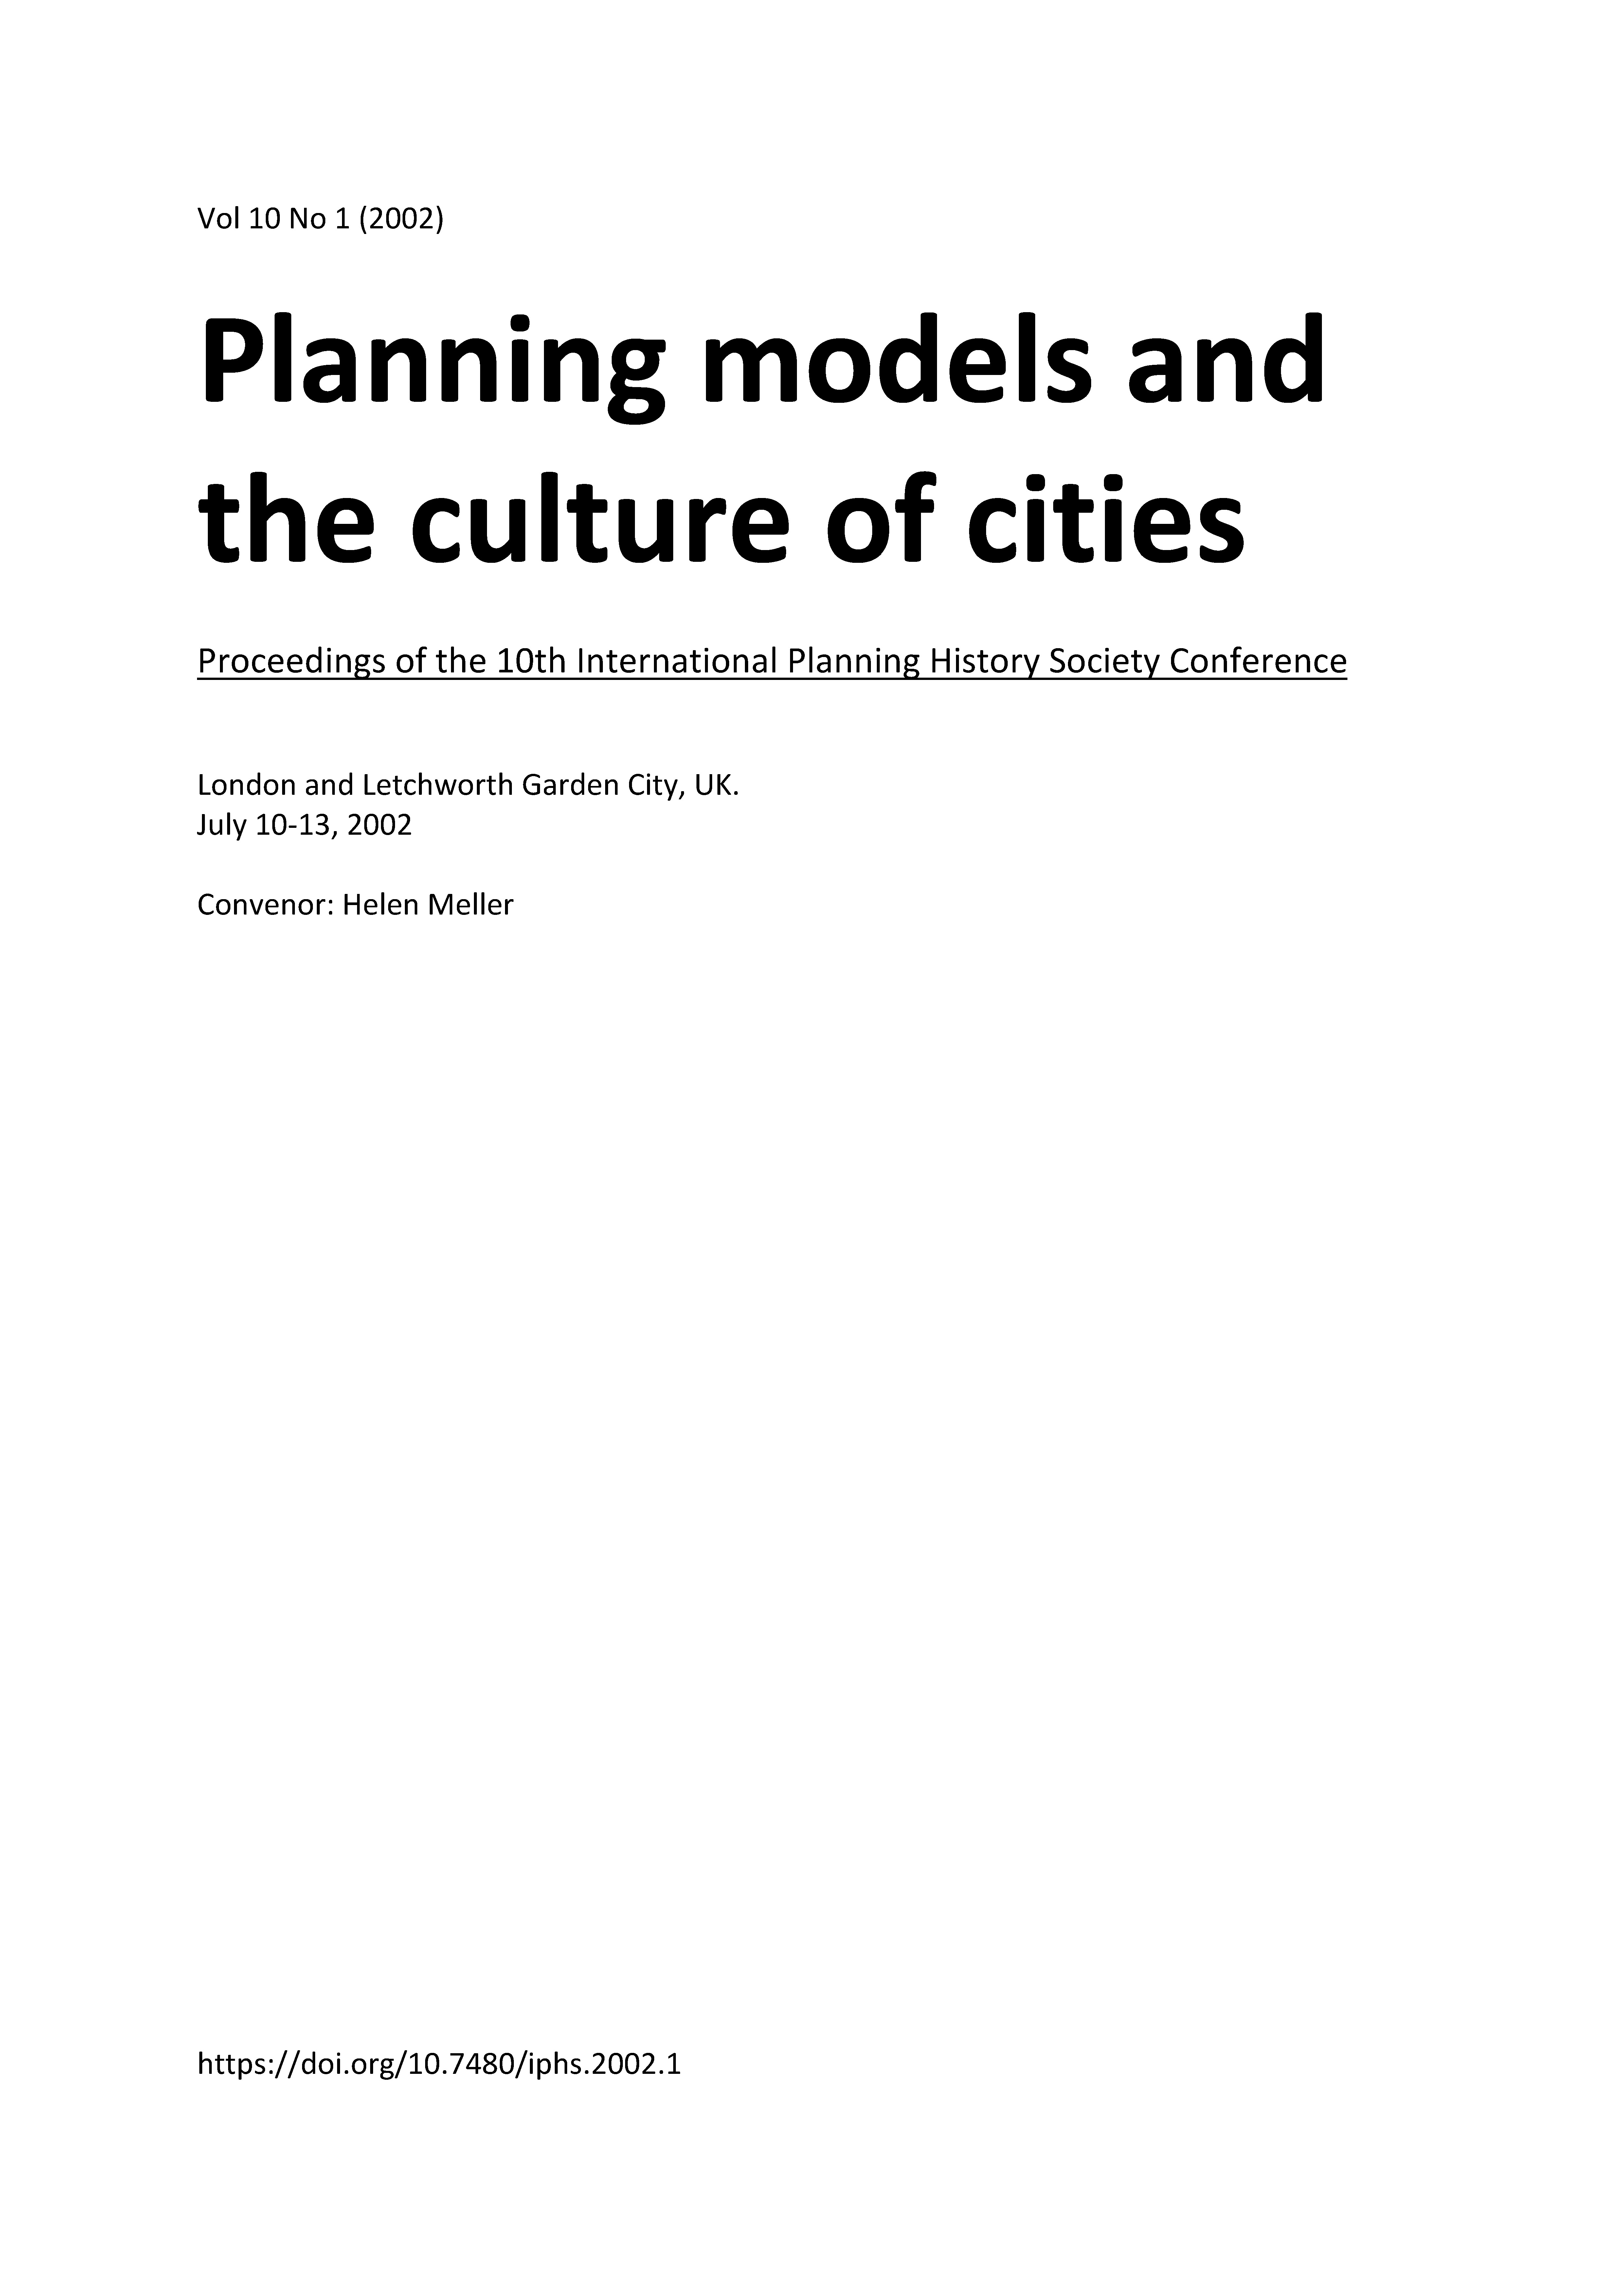 					View Vol. 10 No. 1 (2002): Planning models and the culture of cities
				